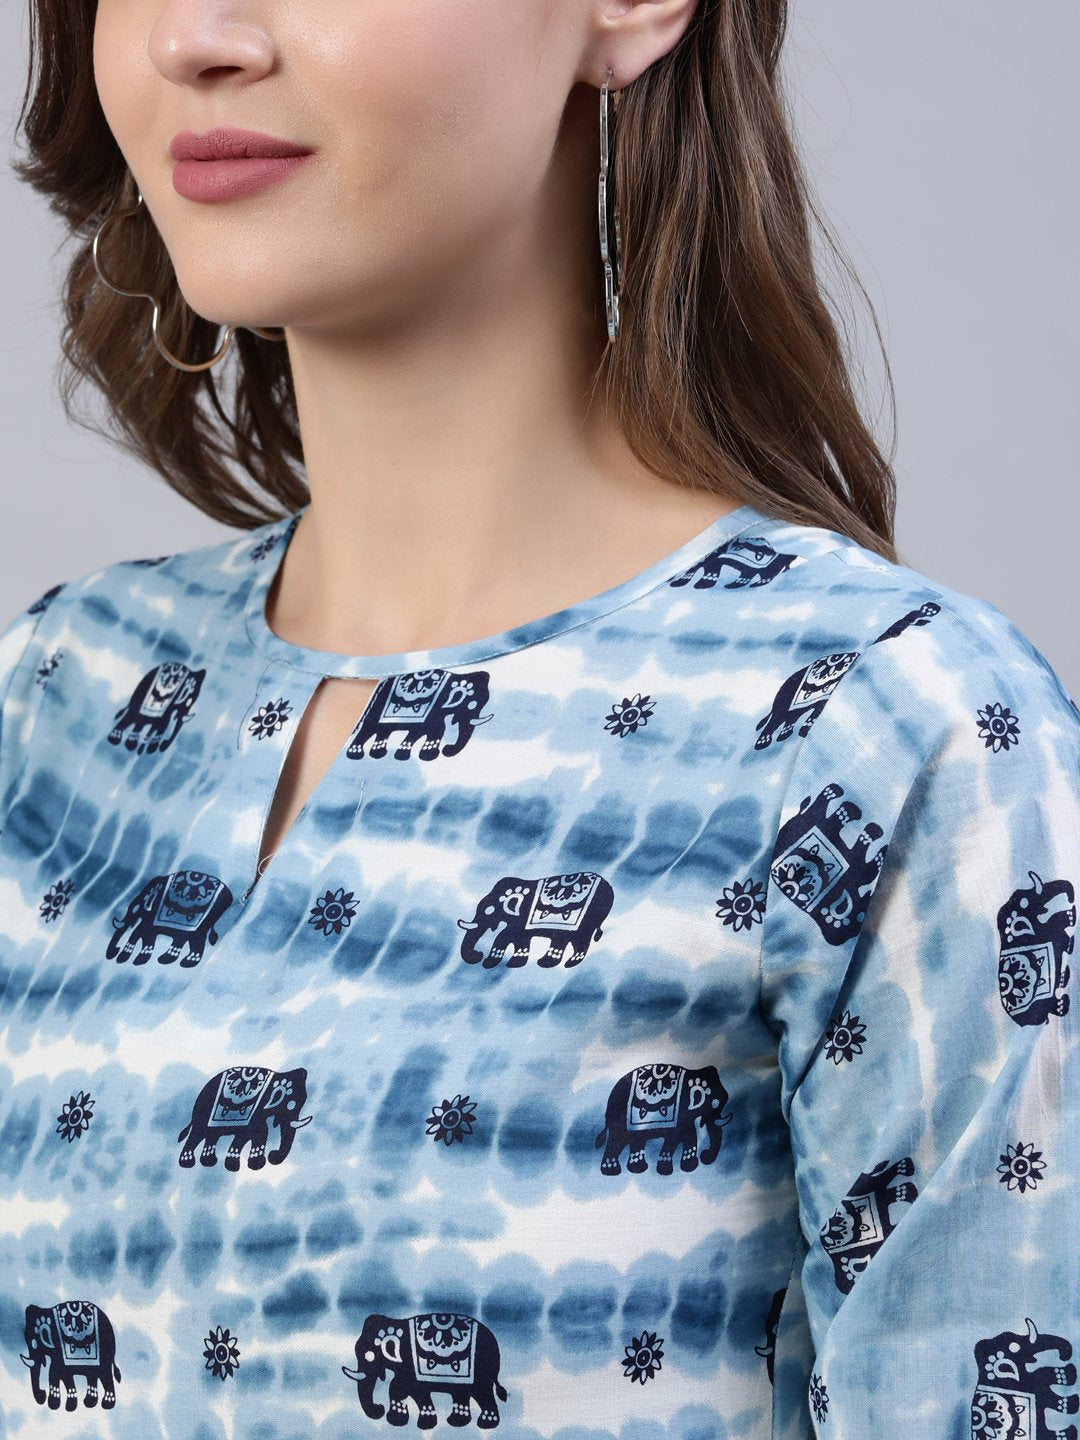 Women's  Blue Printed Tiered Dress With Three Quarter Sleeves - Nayo Clothing